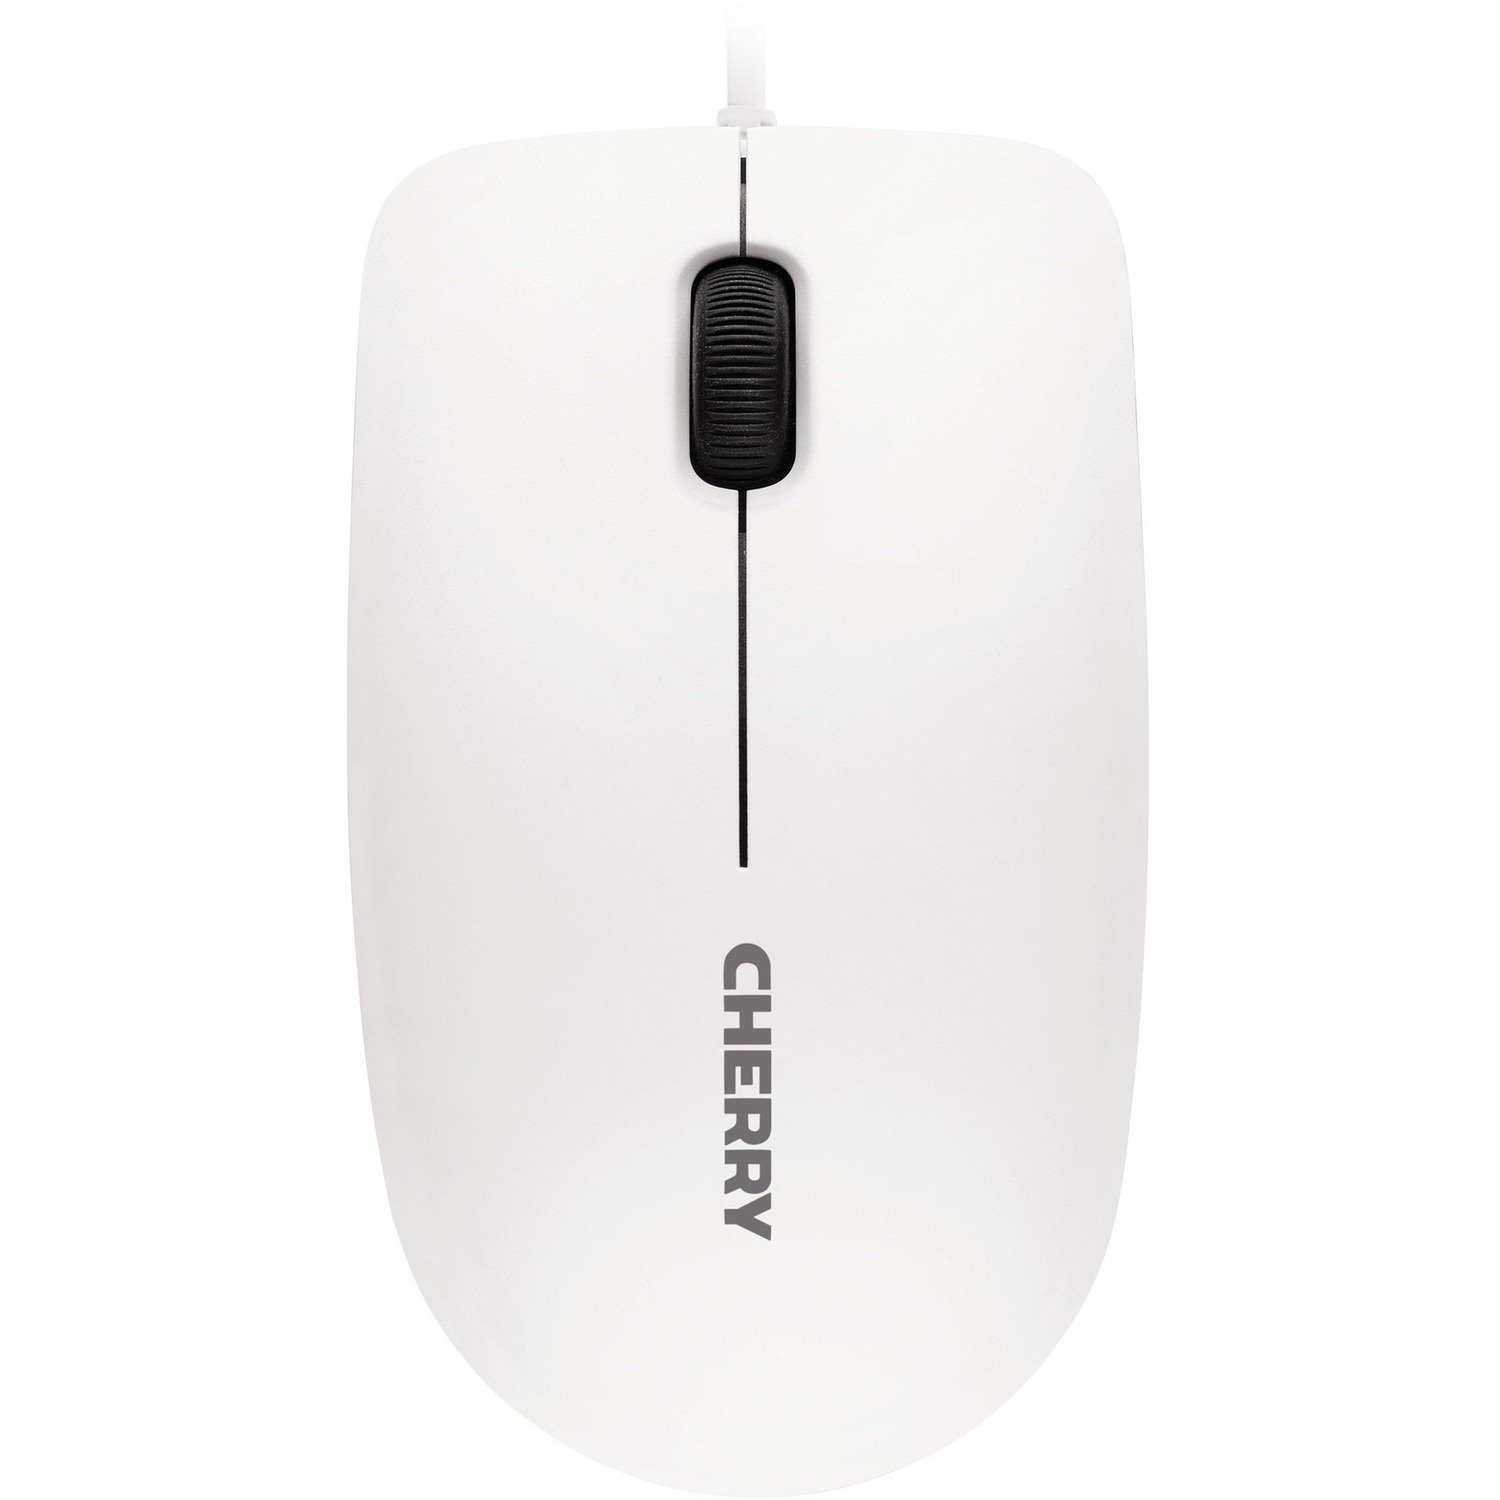 CHERRY MC 2000 Mouse - USB - Infrared - 3 Button(s) - Pale Gray